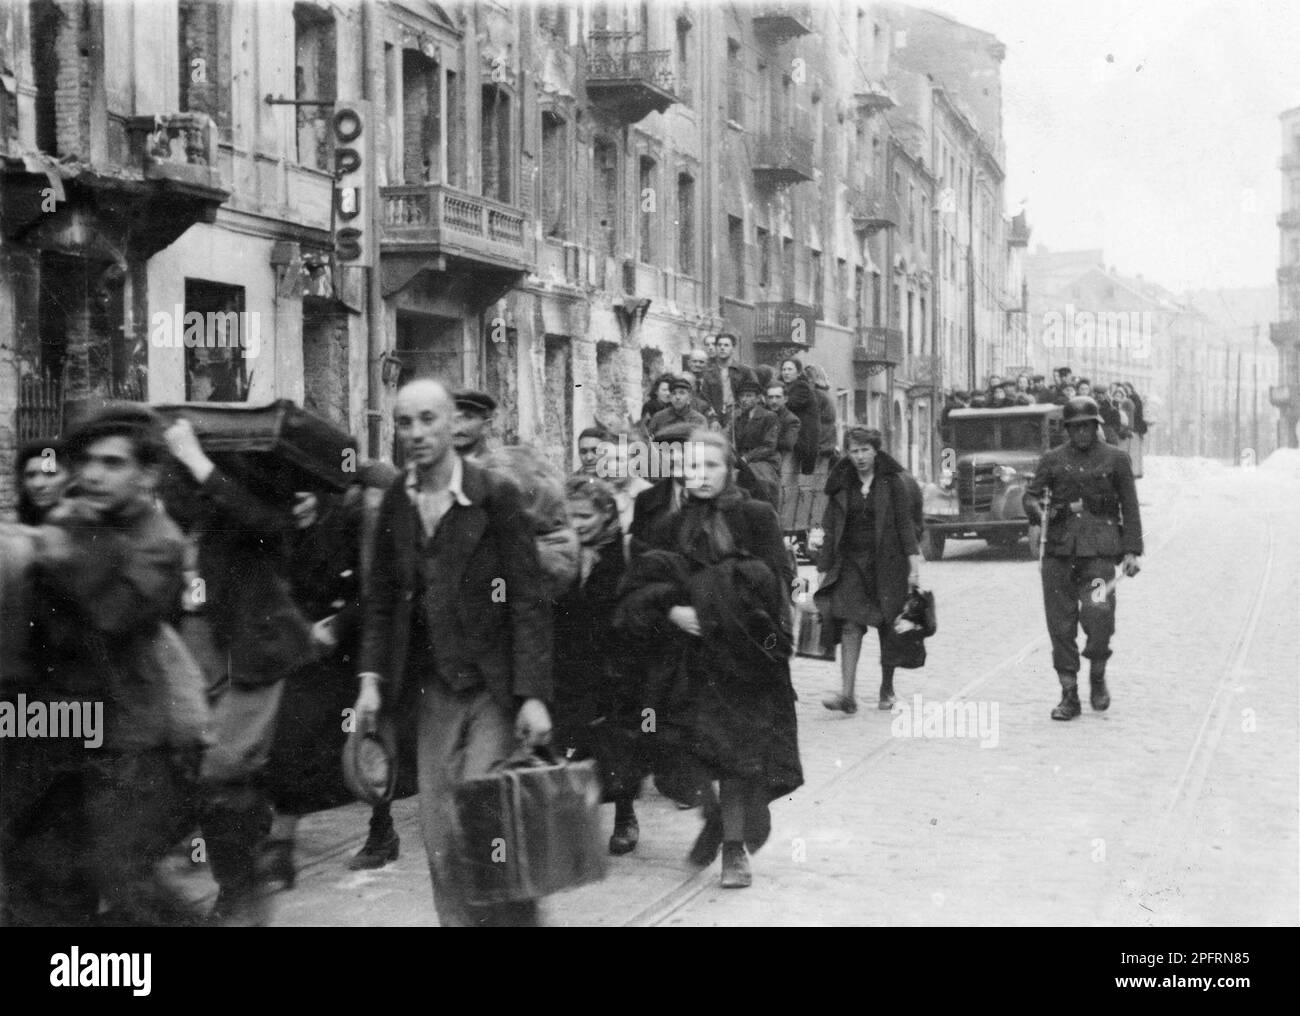 In January 1943 the nazis arrived to round up the Jews of the Warsaw Ghetto  The Jews, resolved to fight it out, took on the SS with homemade and primitive weapons. The defenders were executed or deported and the Ghetto area was systematically demolished. This event is known as The Ghetto Uprising. This image shows a column of Jews being marched out of the city ready for shipping to the death camps. This image is from the German photographic record of the event, known as the Stroop report. Stock Photo